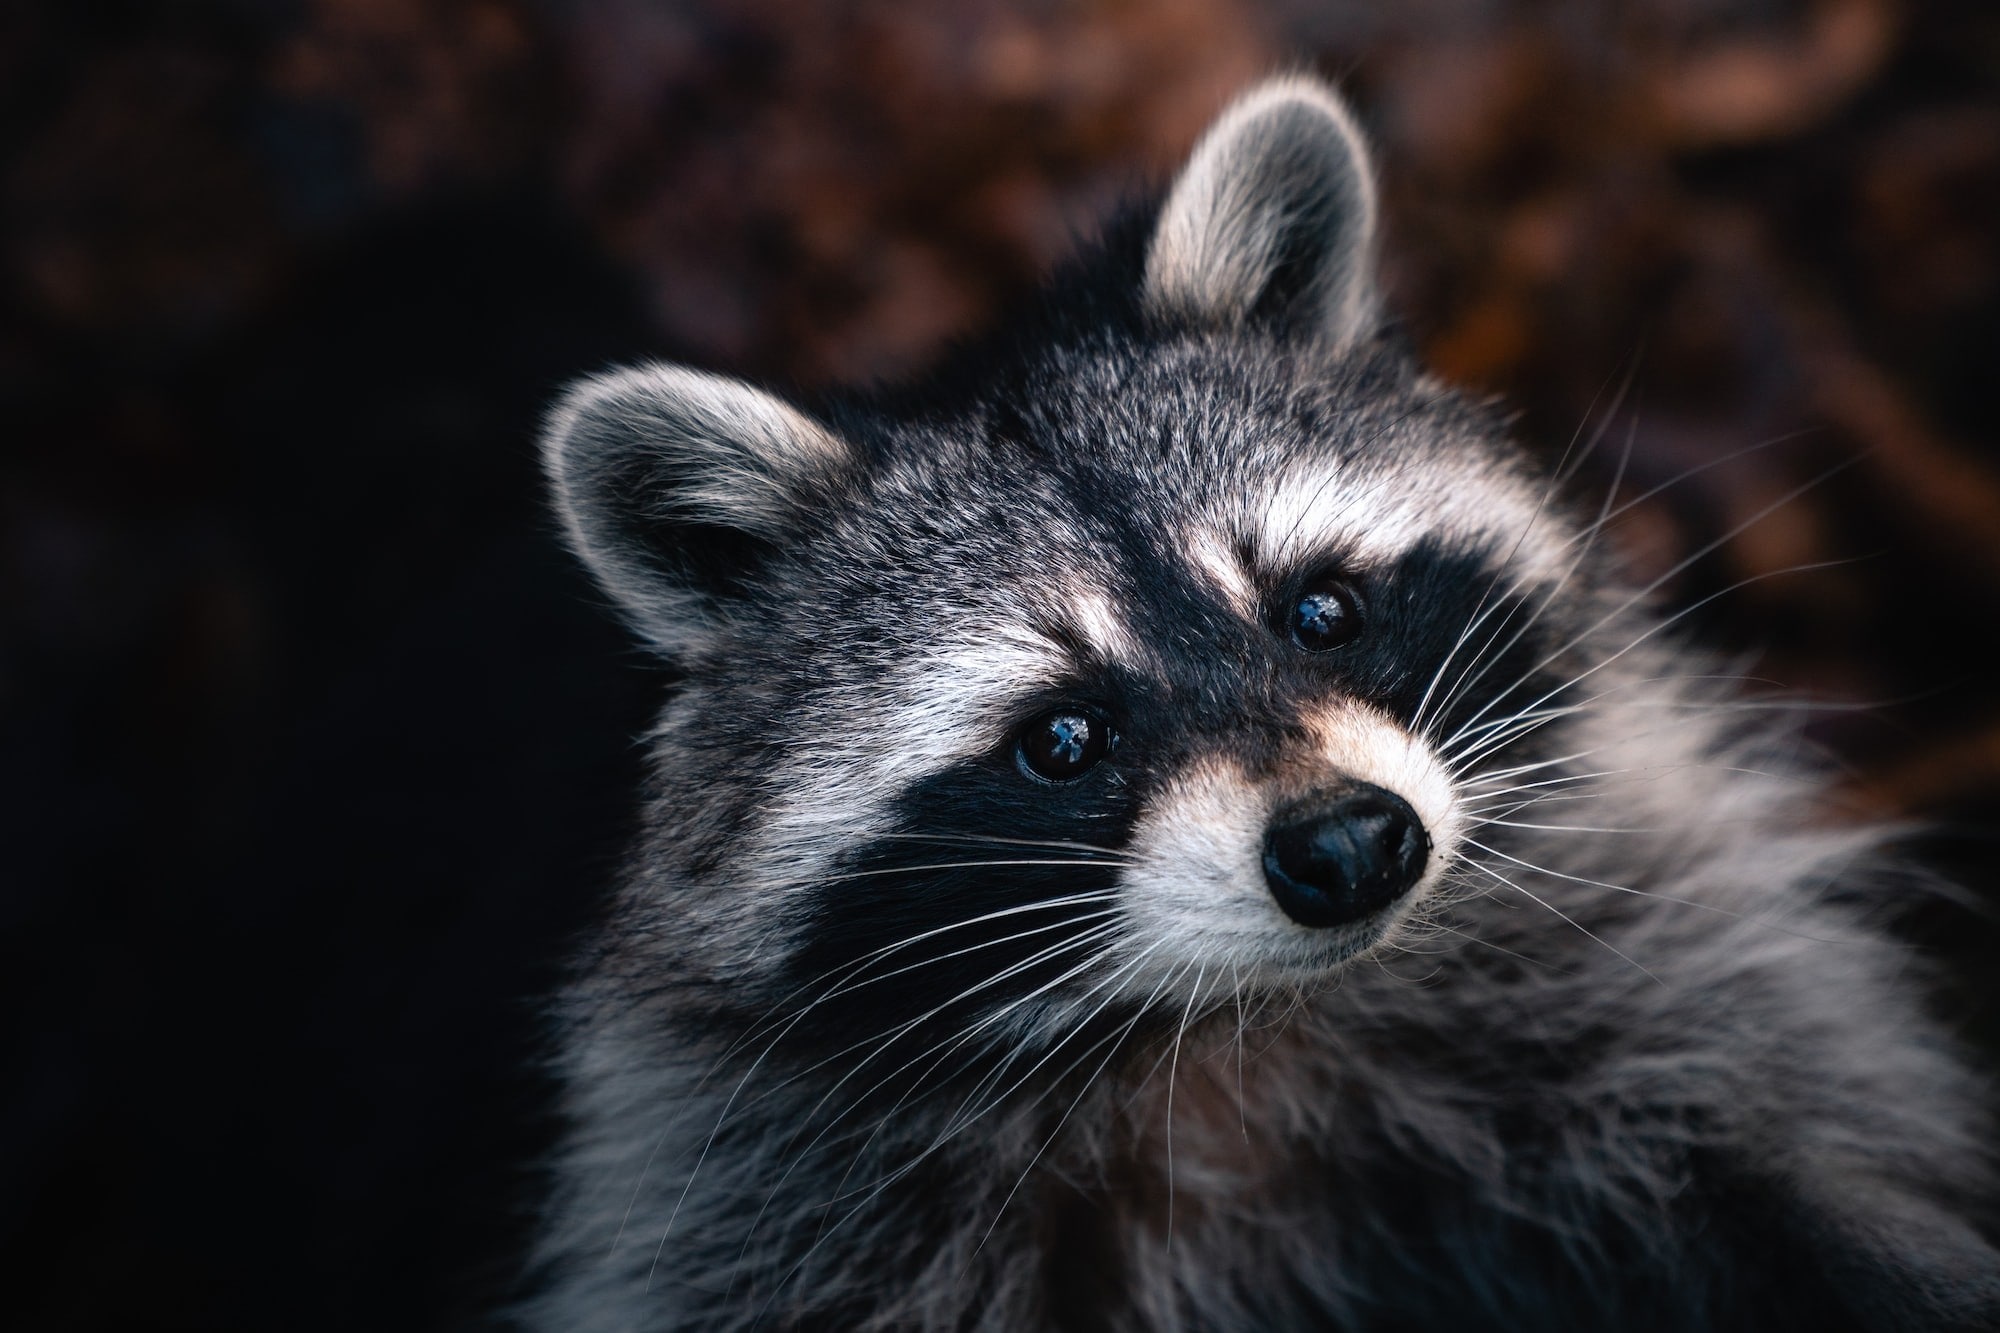 Raccoon Trapping Services in Austin, TX, Raccoon Removal Services from homes in Austin, TX, Raccoon Removal and Control in Austin, TX